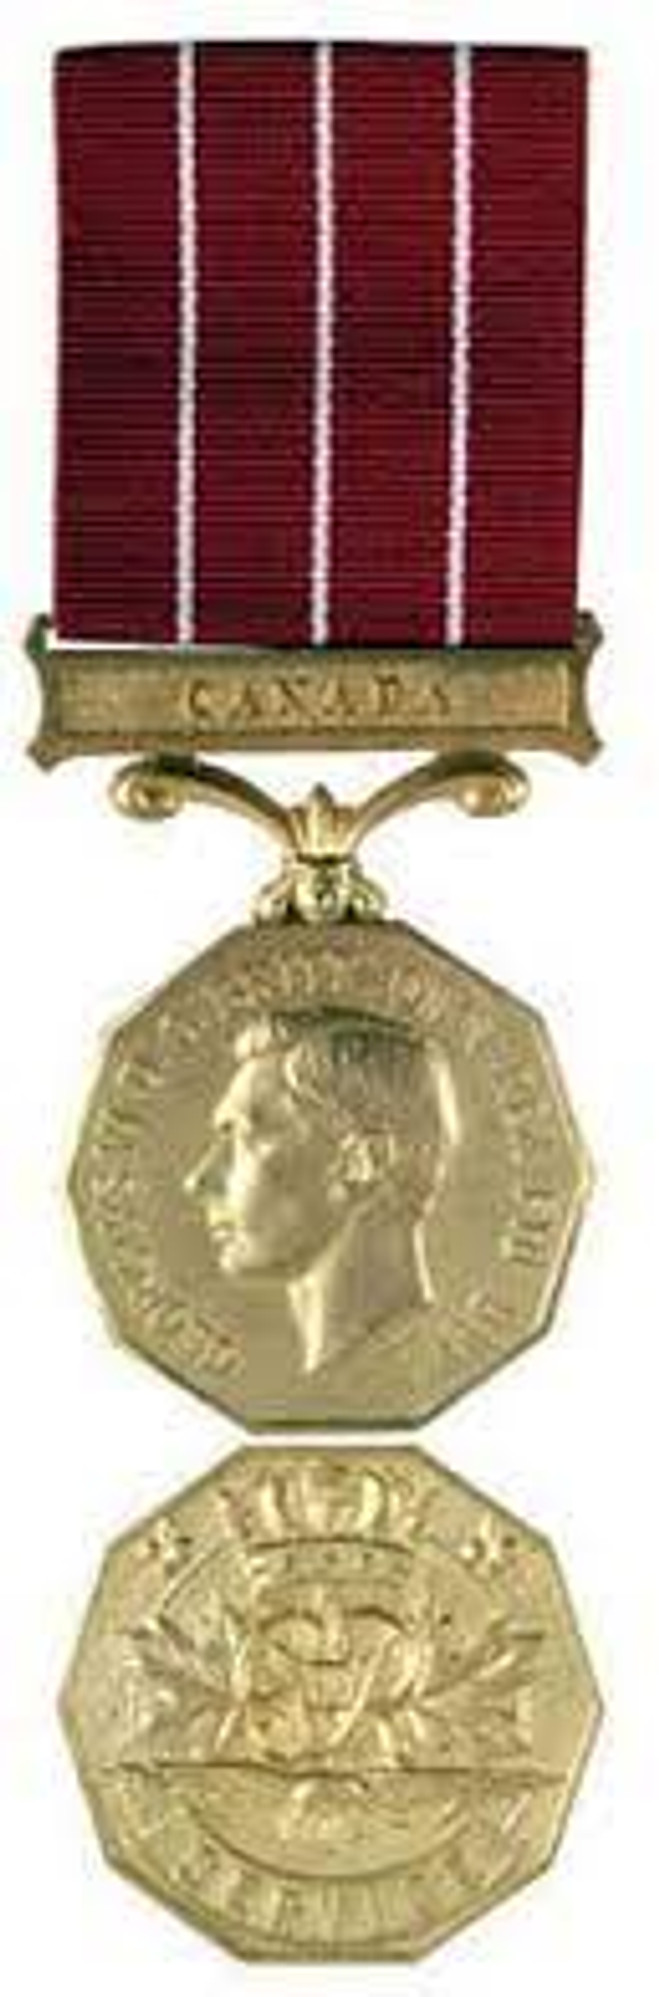 The Canadian Forces' Decoration Miniature Medal (King George VI)